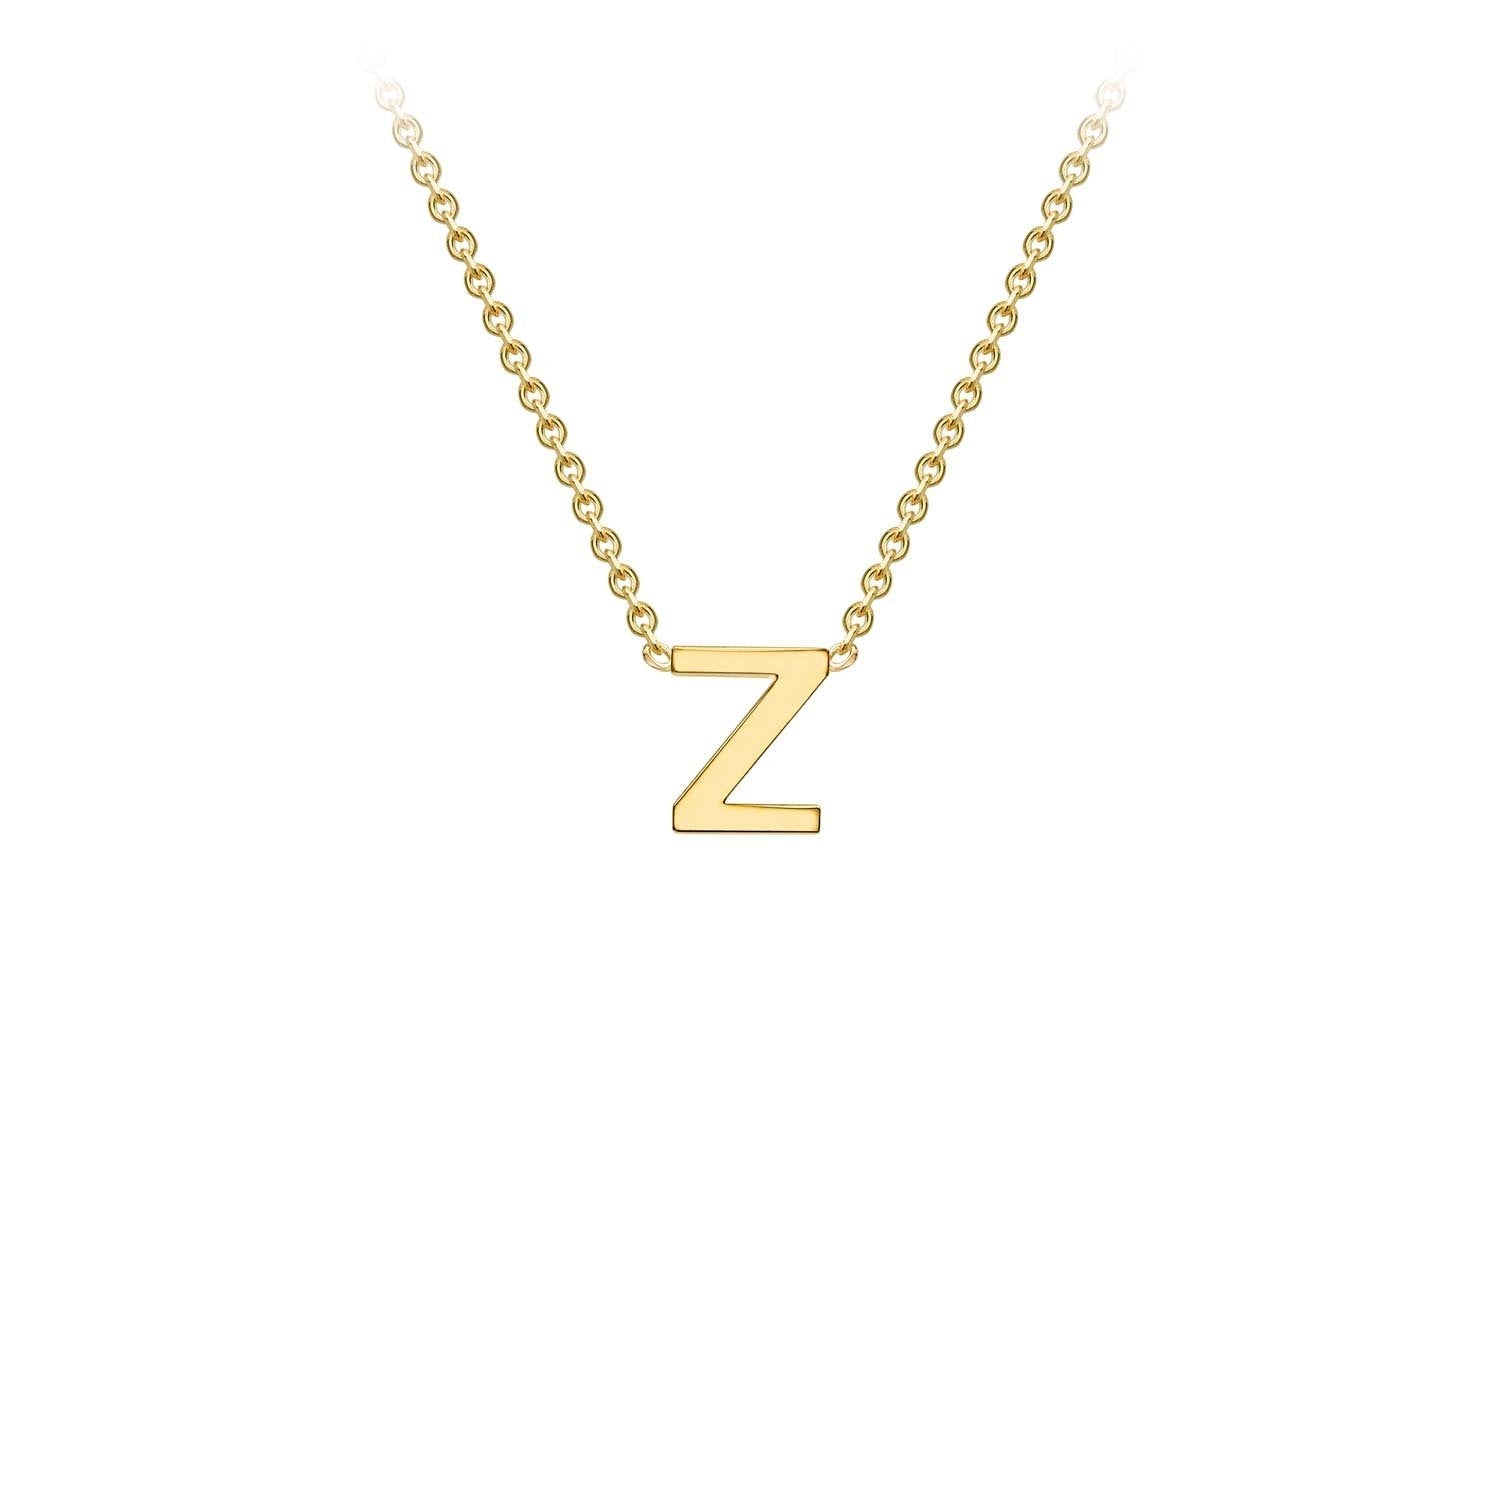 9ct Yellow Gold 'Z' Initial Adjustable Letter Necklace 38/43cm